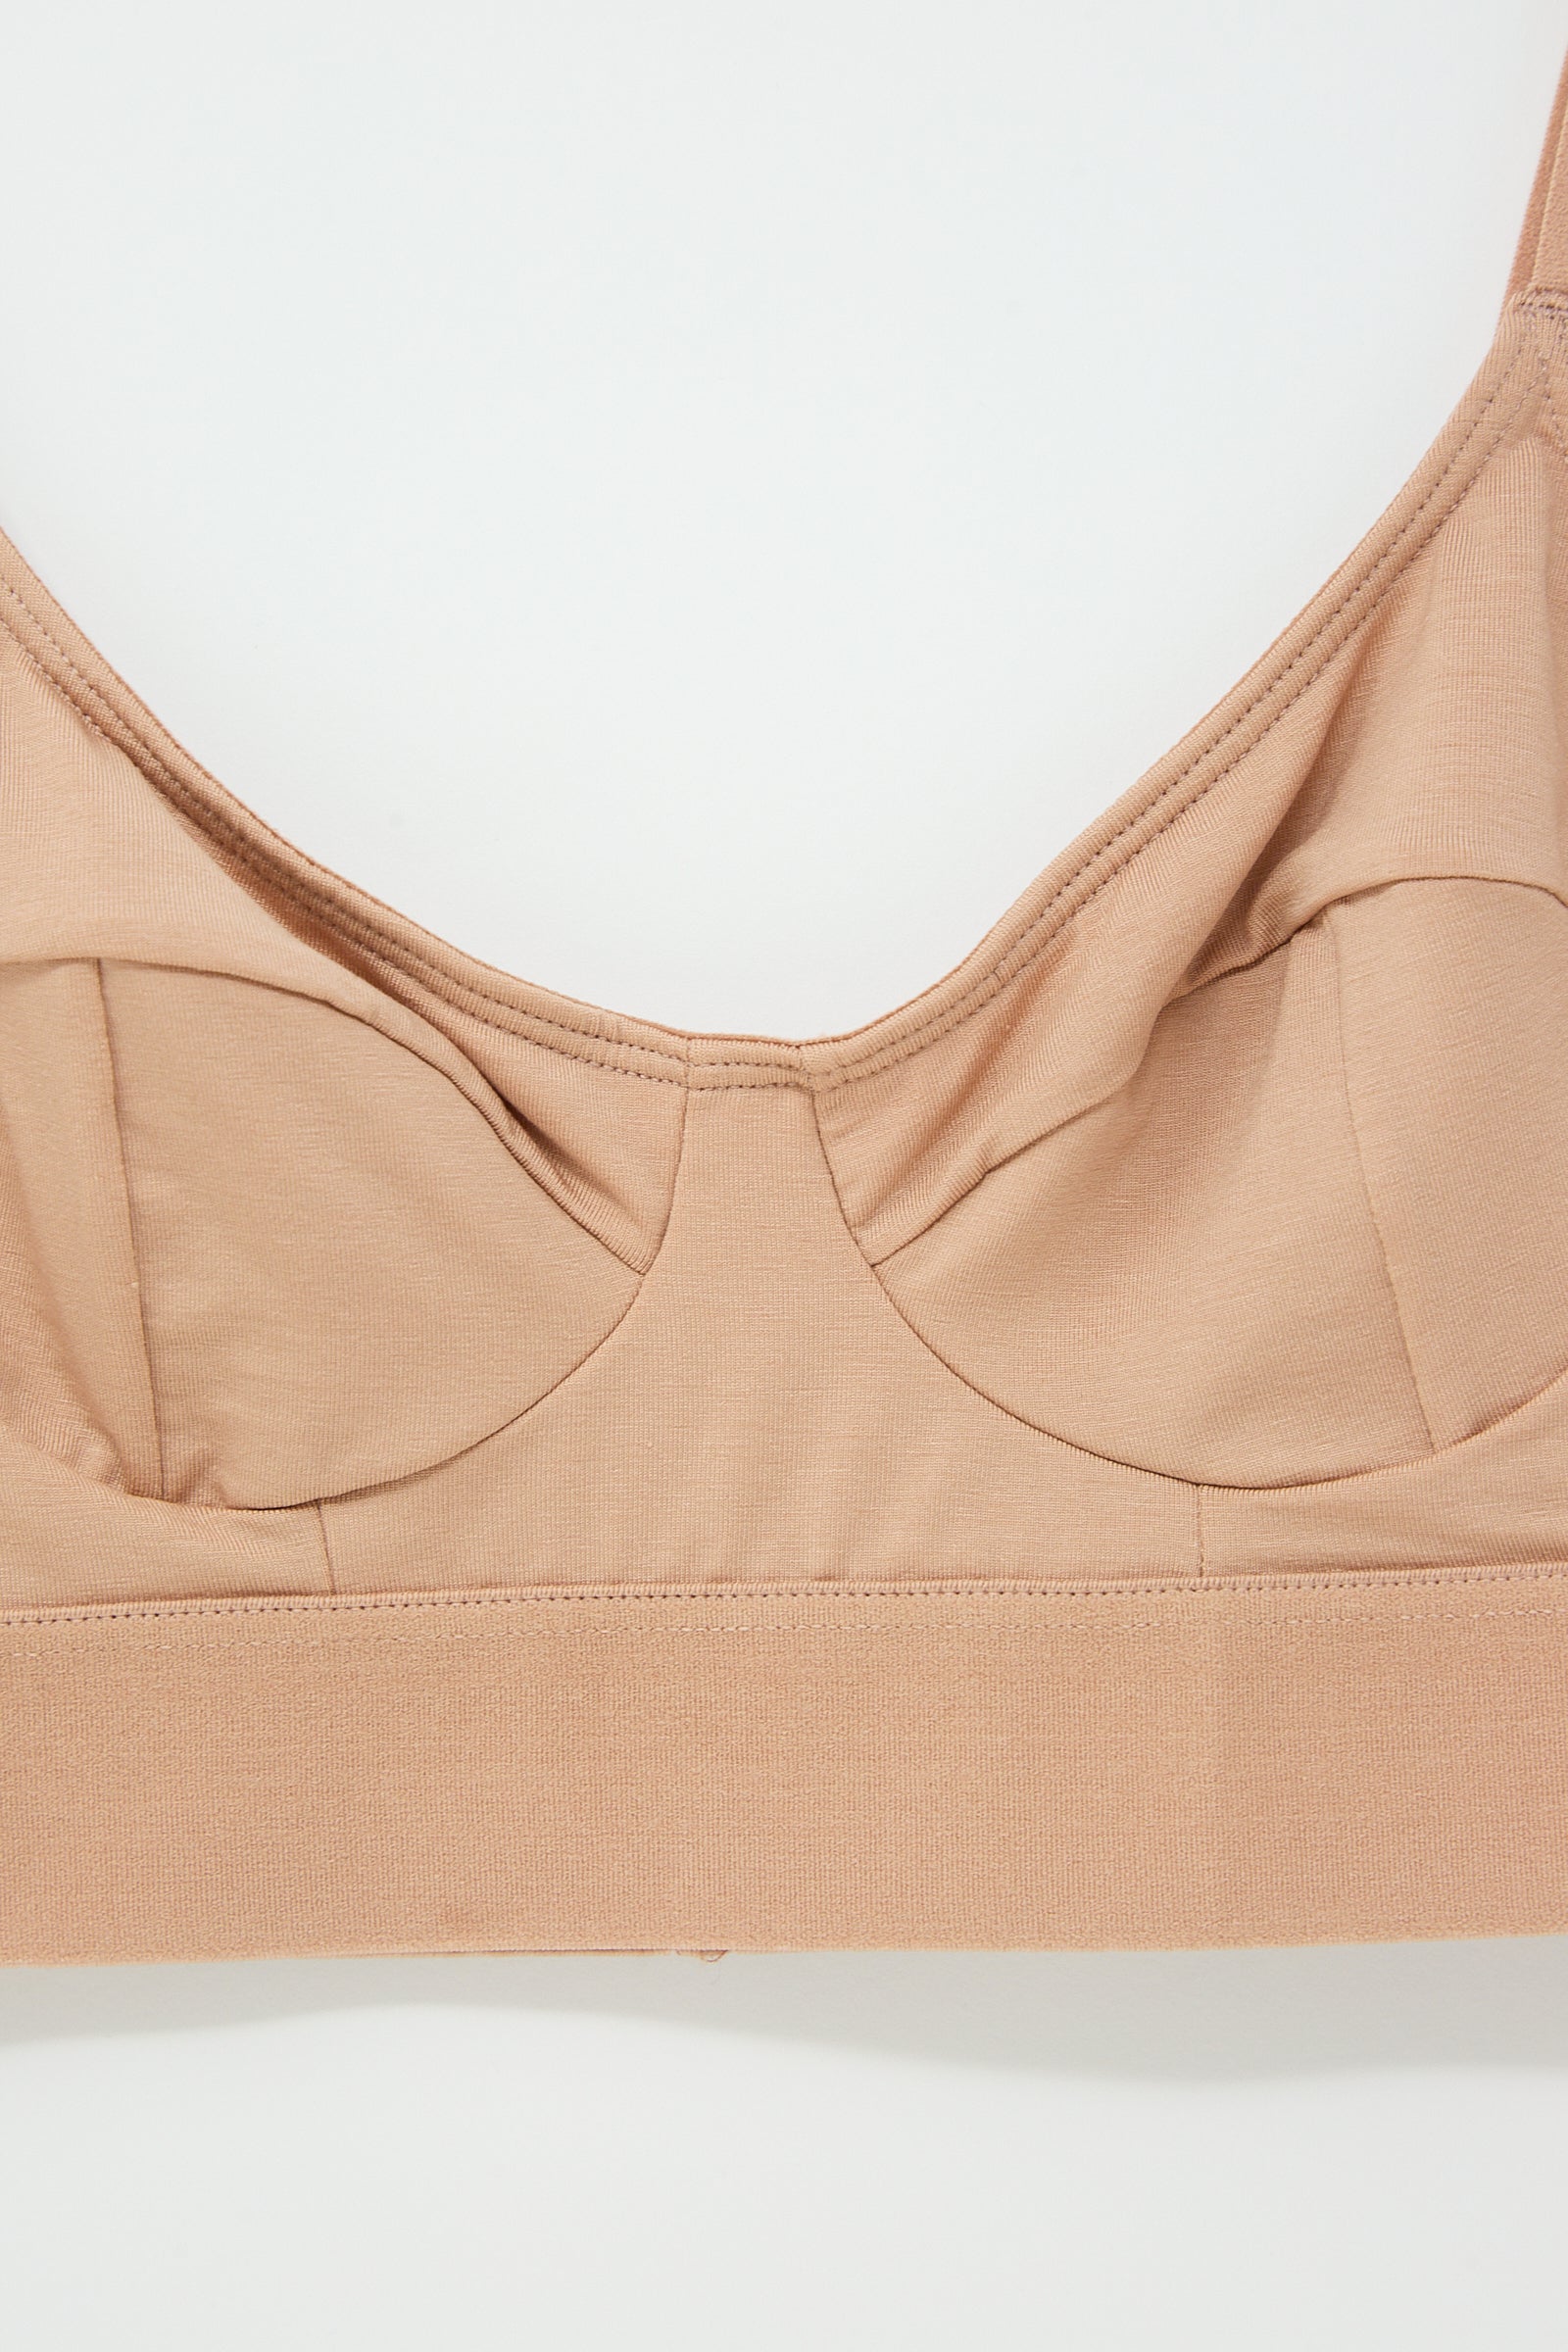 Close-up of a Baserange Bamboo Soft Bra in Yu Rose on a white background.